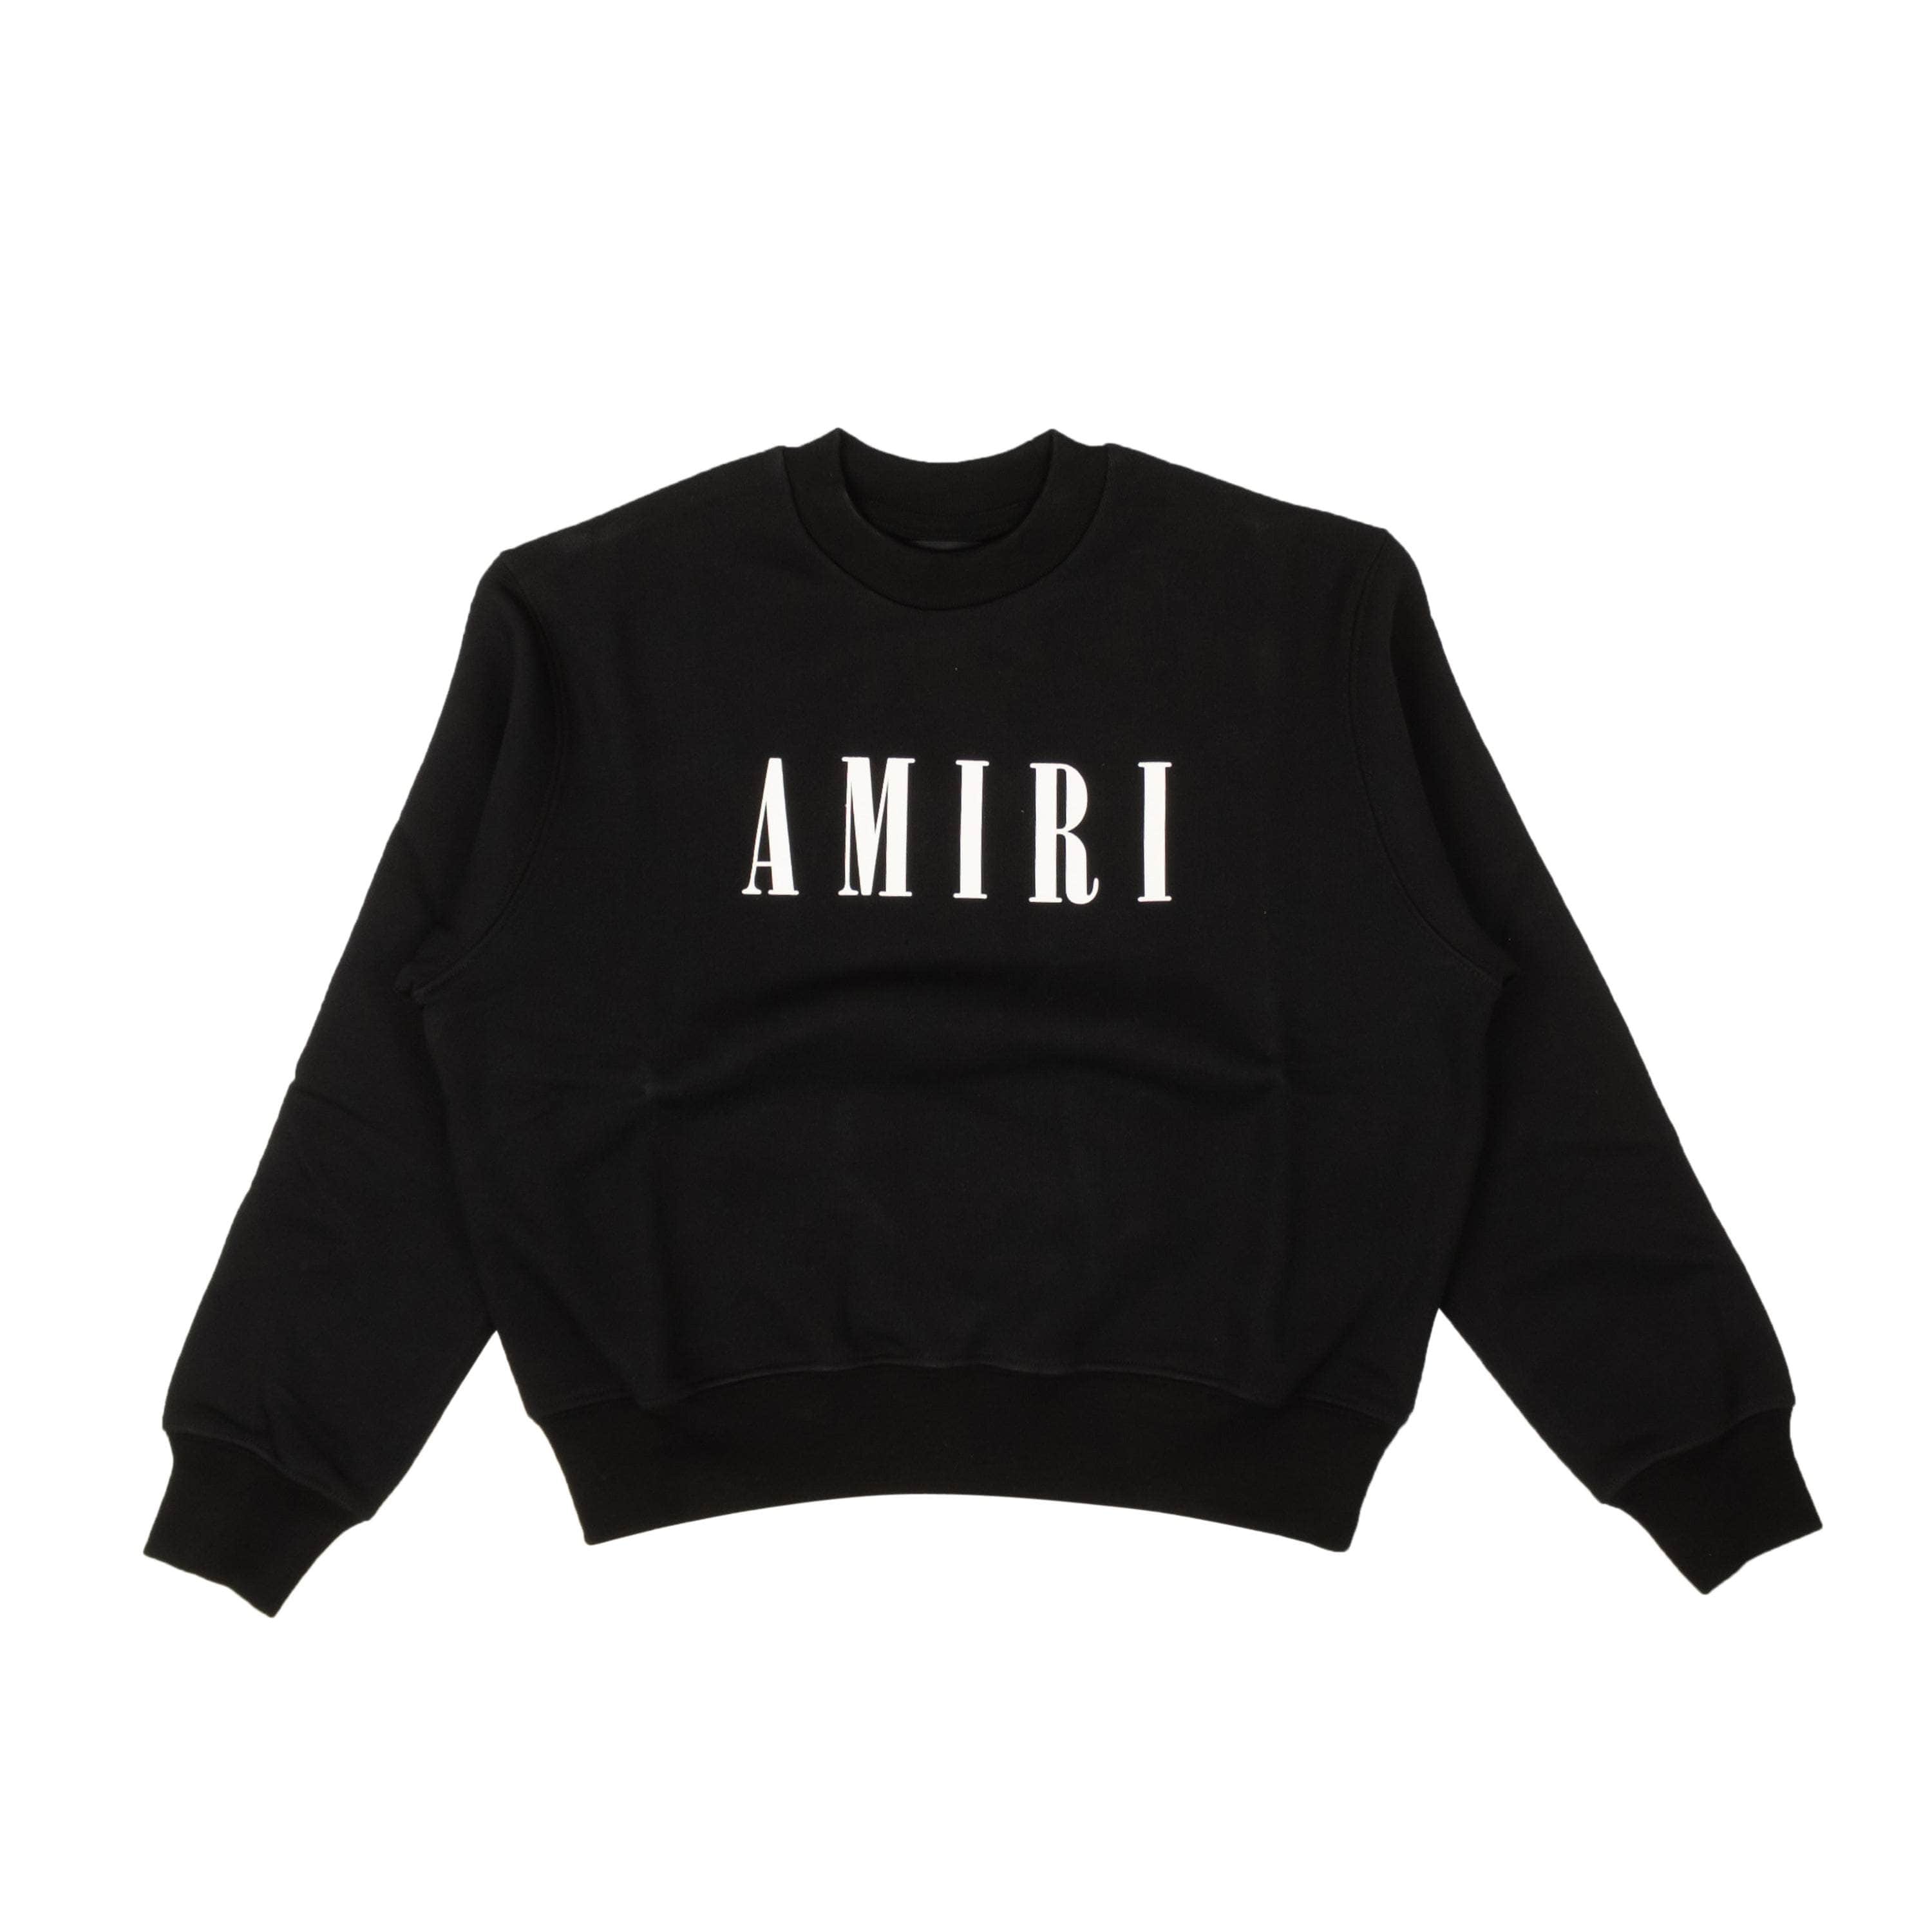 Amiri 250-500, amiri, boys-hoodies-sweatshirts, channelenable-all, chicmi, couponcollection, gender-womens, main-clothing, size-10, size-12, size-6, size-8 6 / 95-AMR-1516/6 Boy's Logo Crewneck 95-AMR-1516/6 95-AMR-1516/6